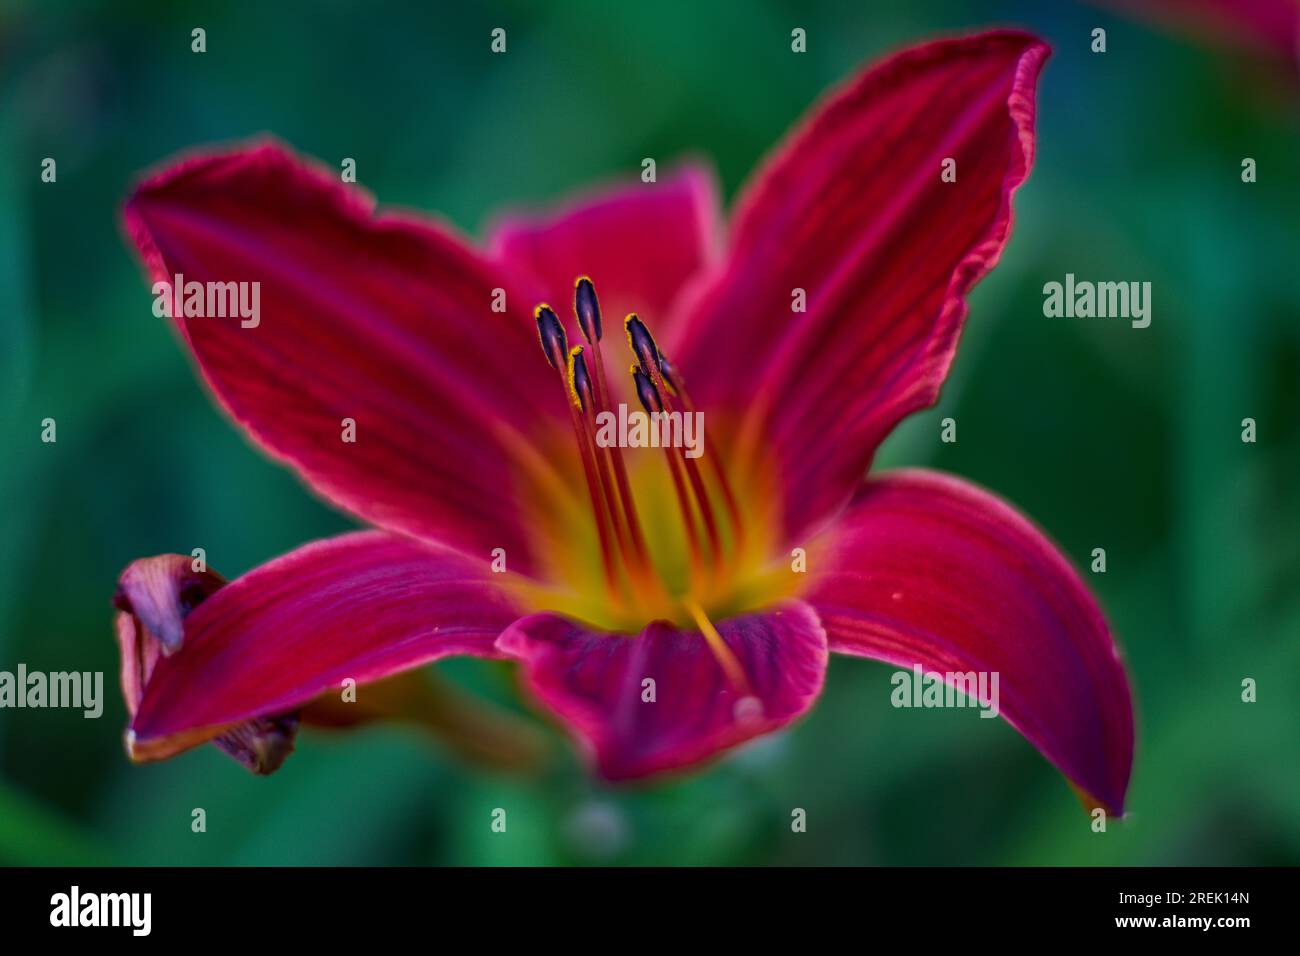 Lush,colorful vivid purple red lily flower close up Stock Photo